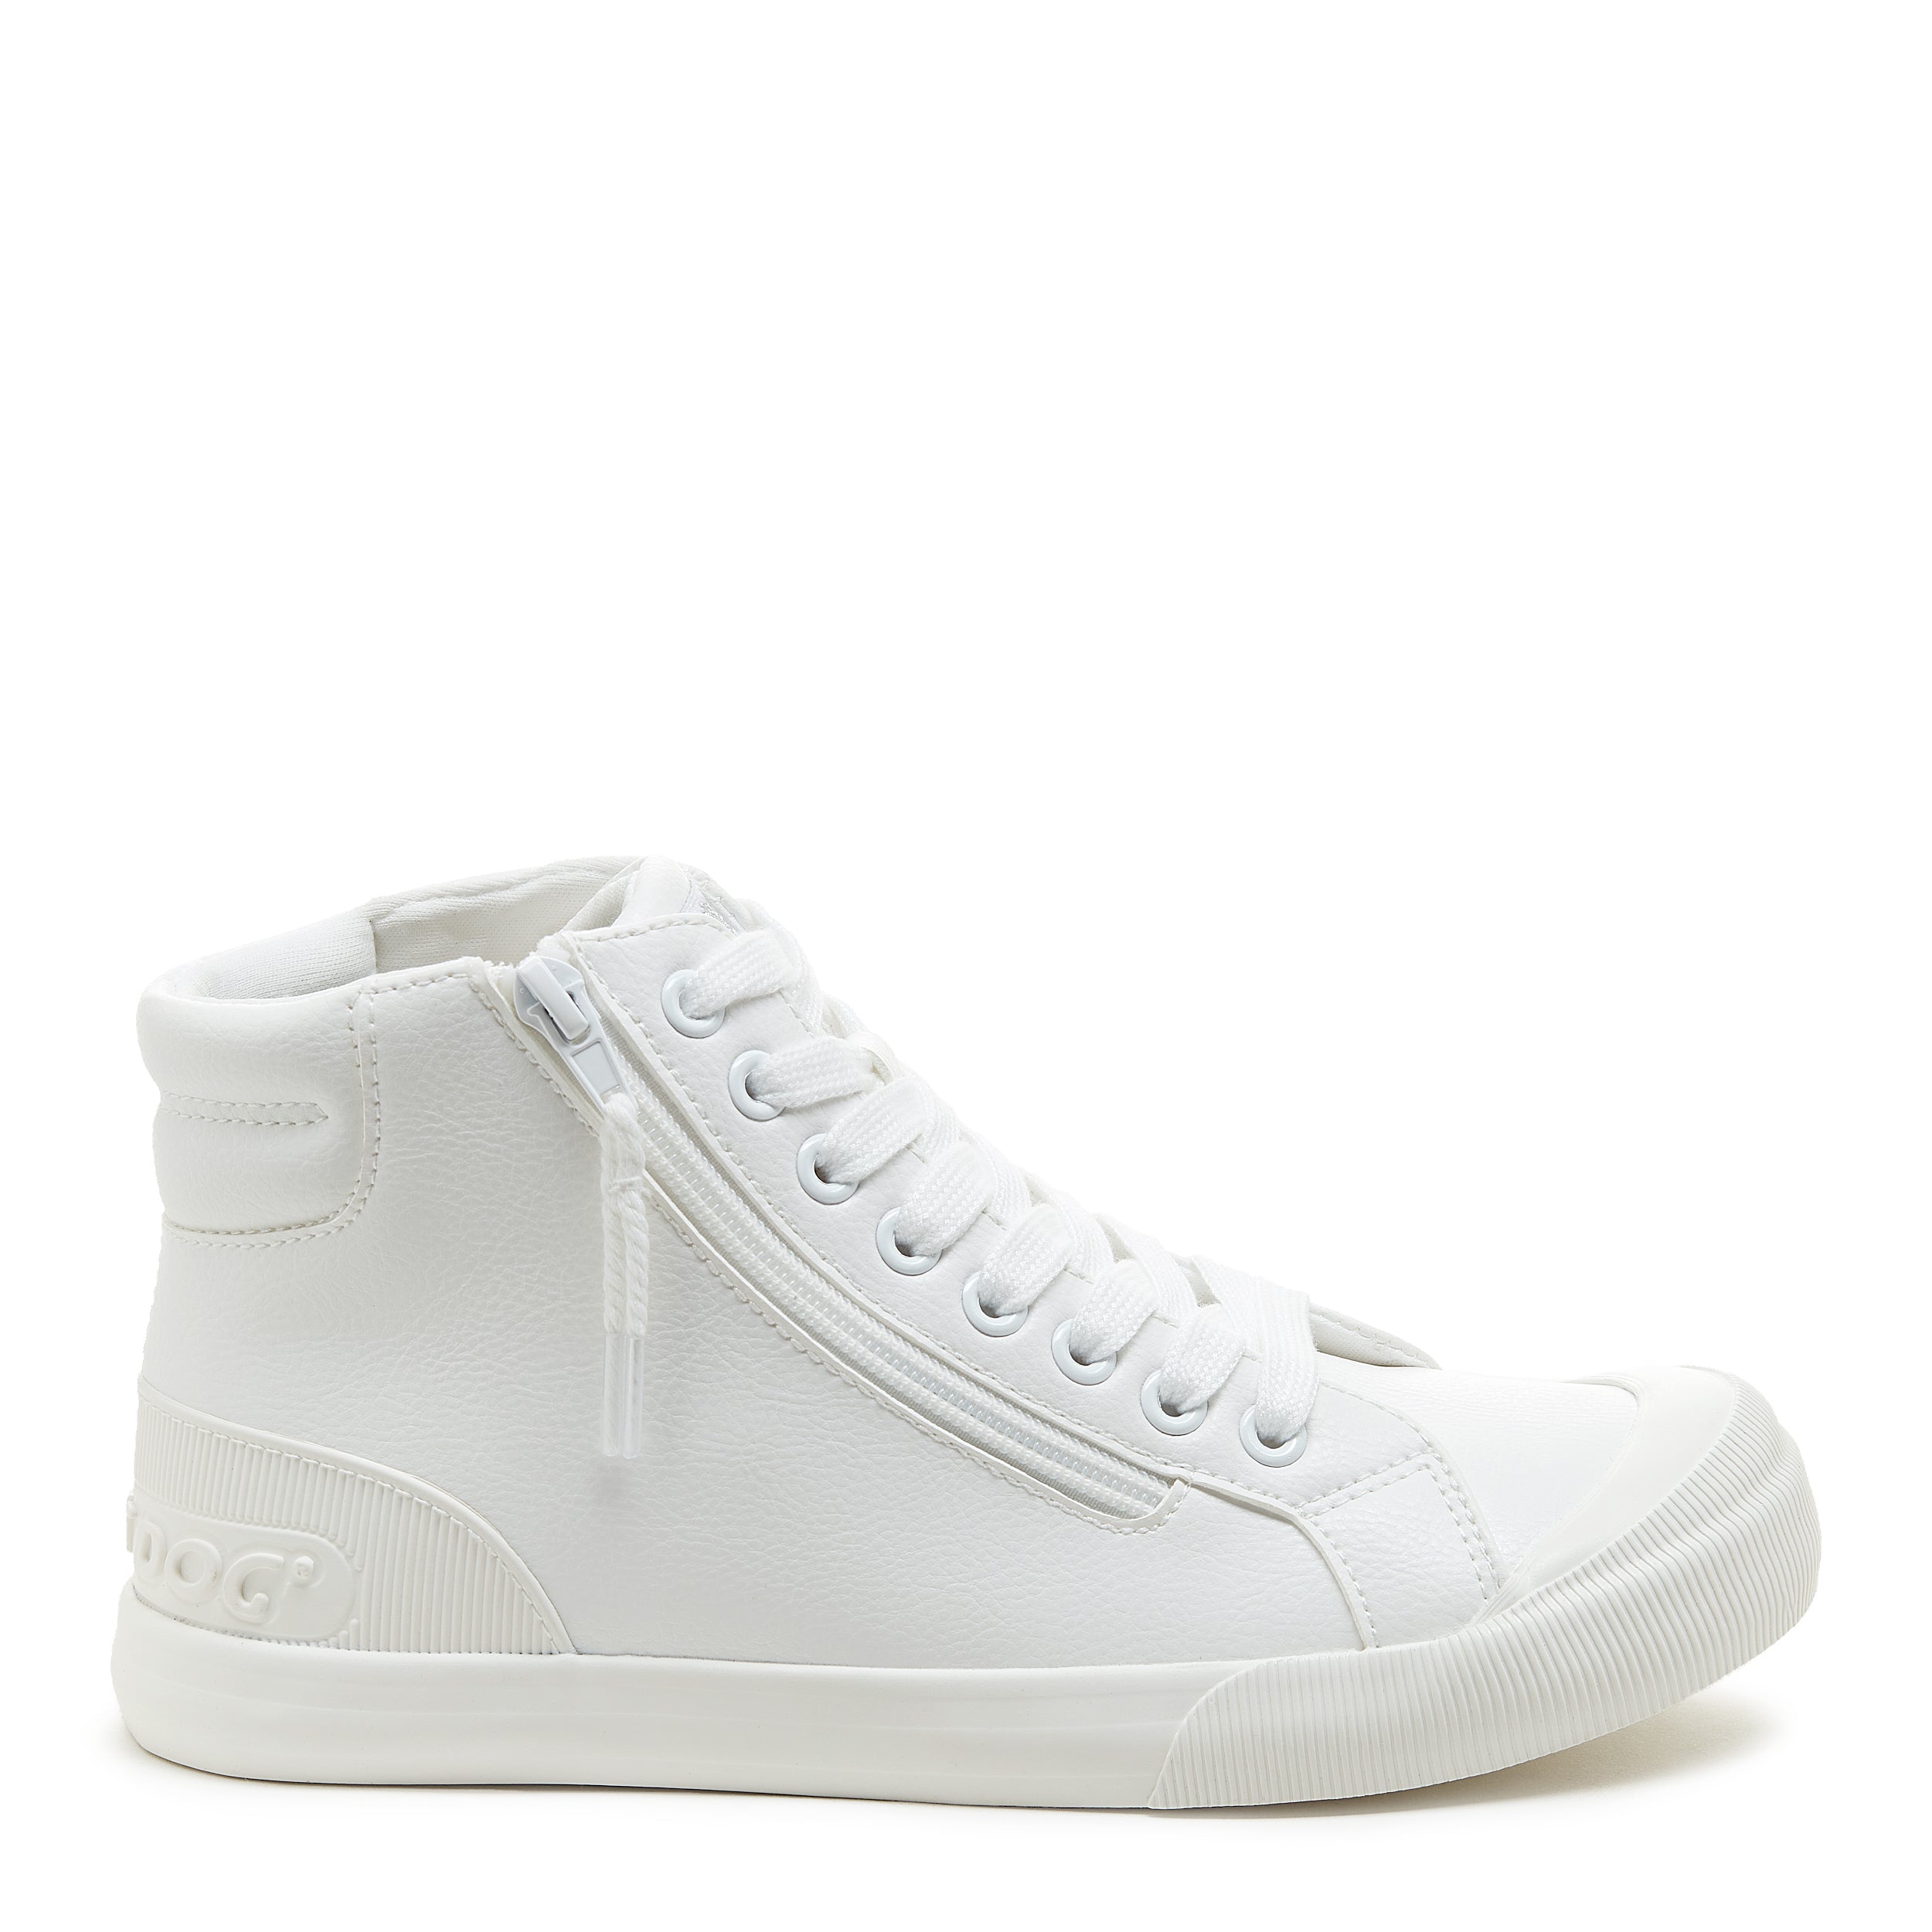 Women's Jazzin Sport White High-Top Sneakers: Be Unstoppable